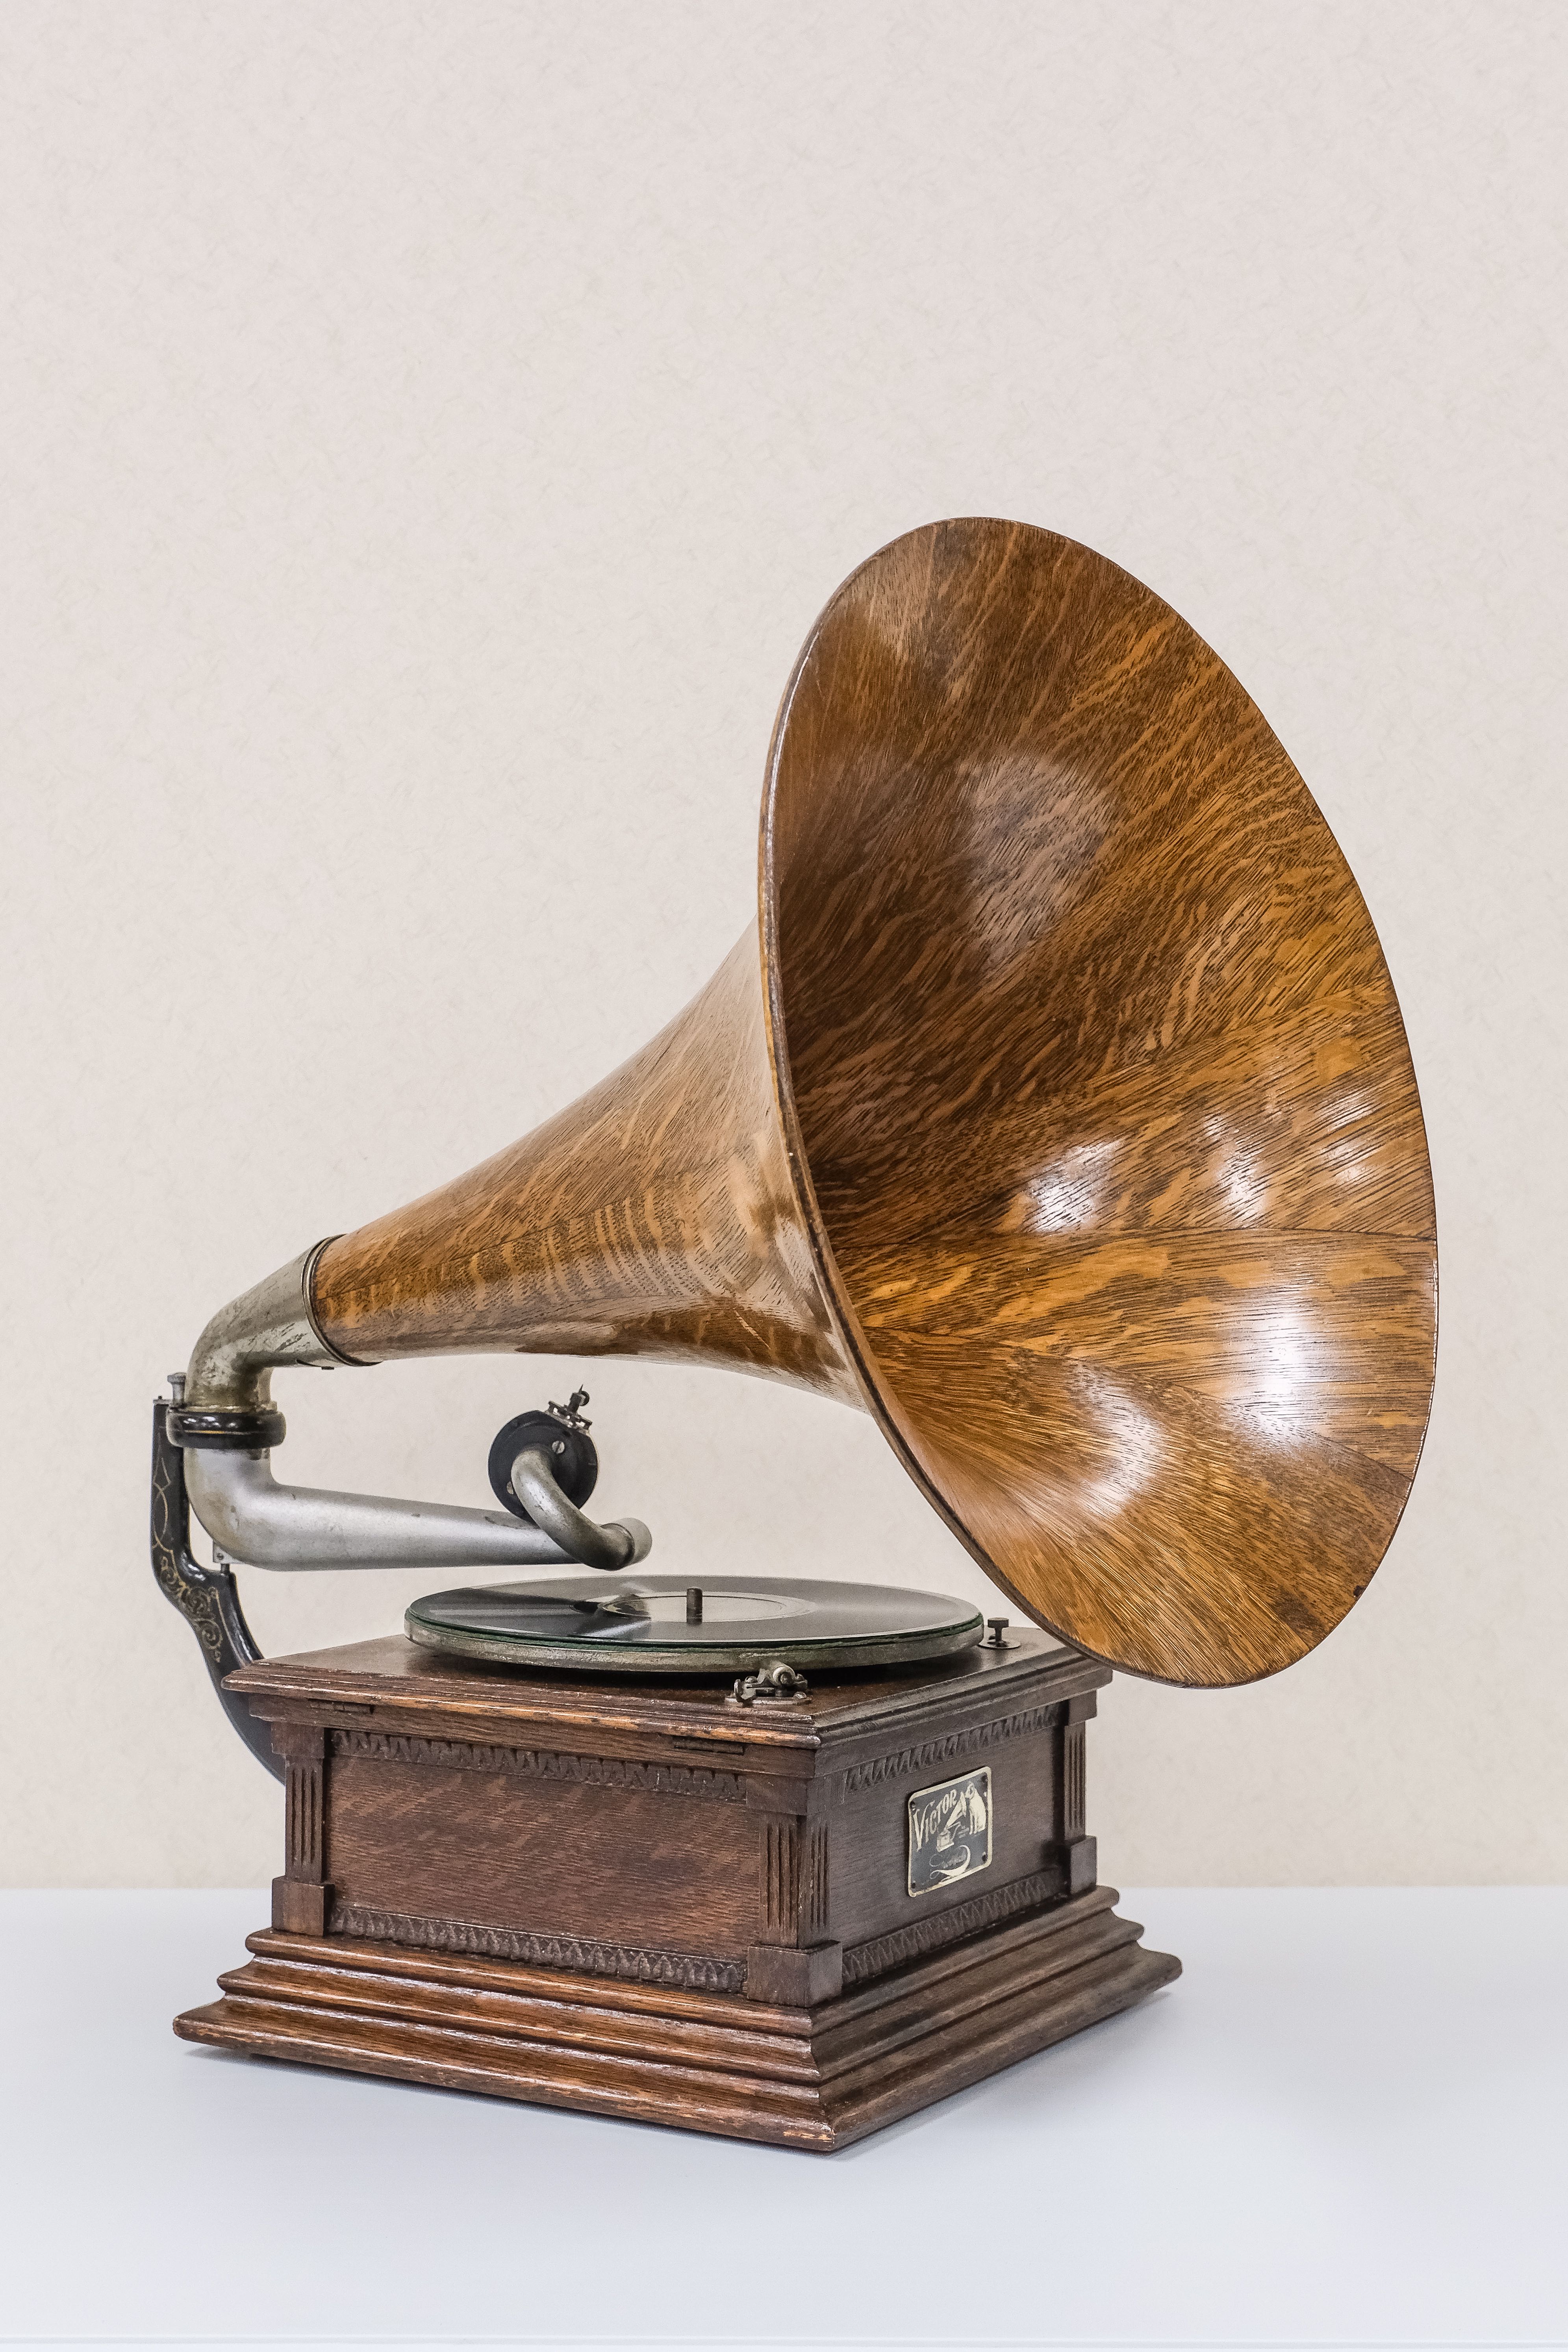 gramophone with horn